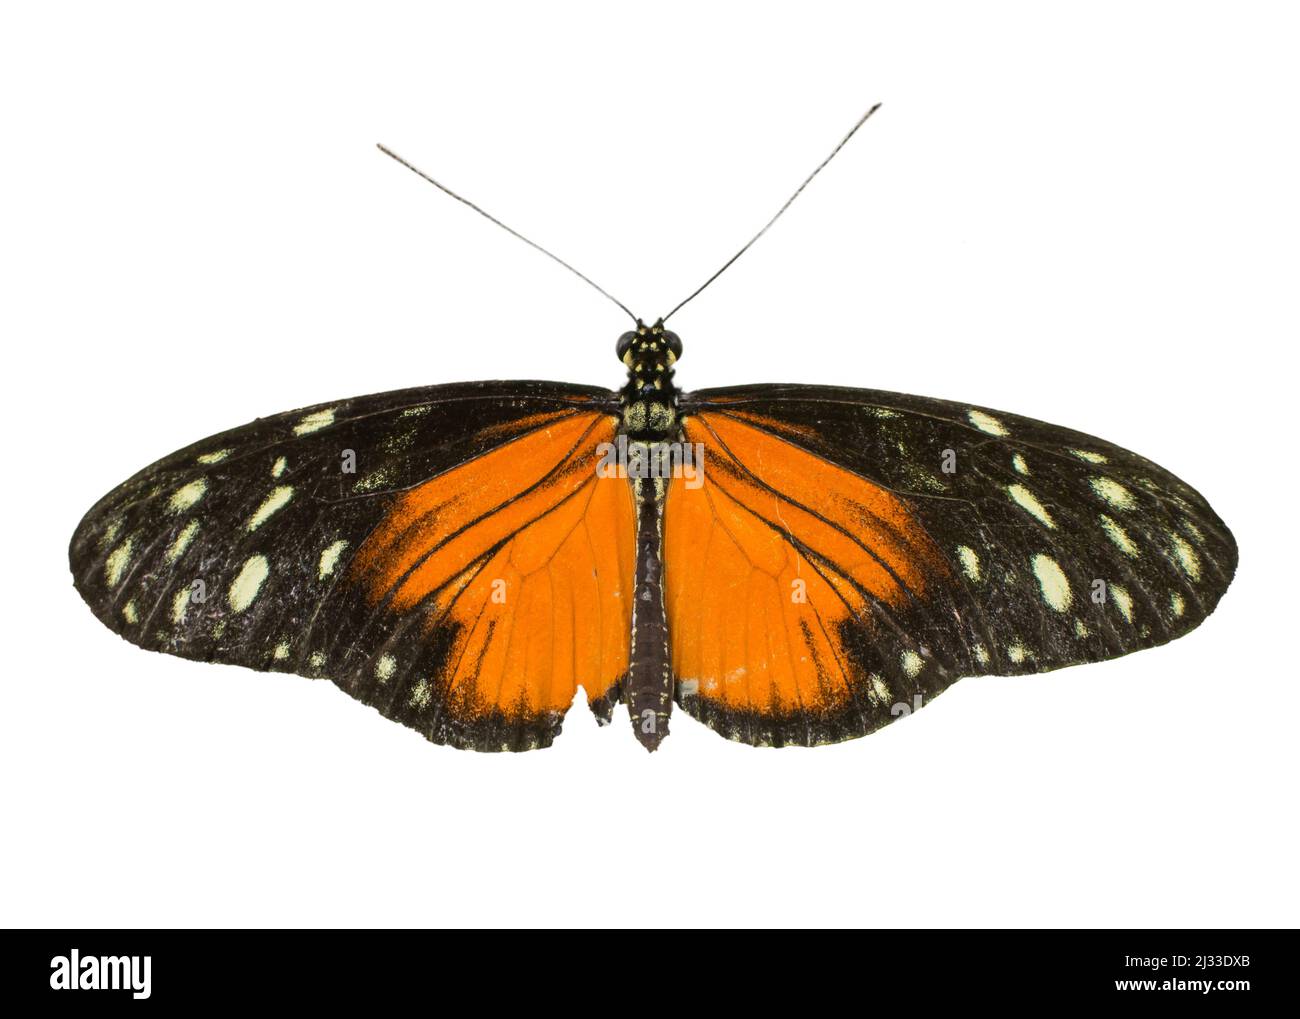 Cut out image of a longwing butterfly Stock Photo